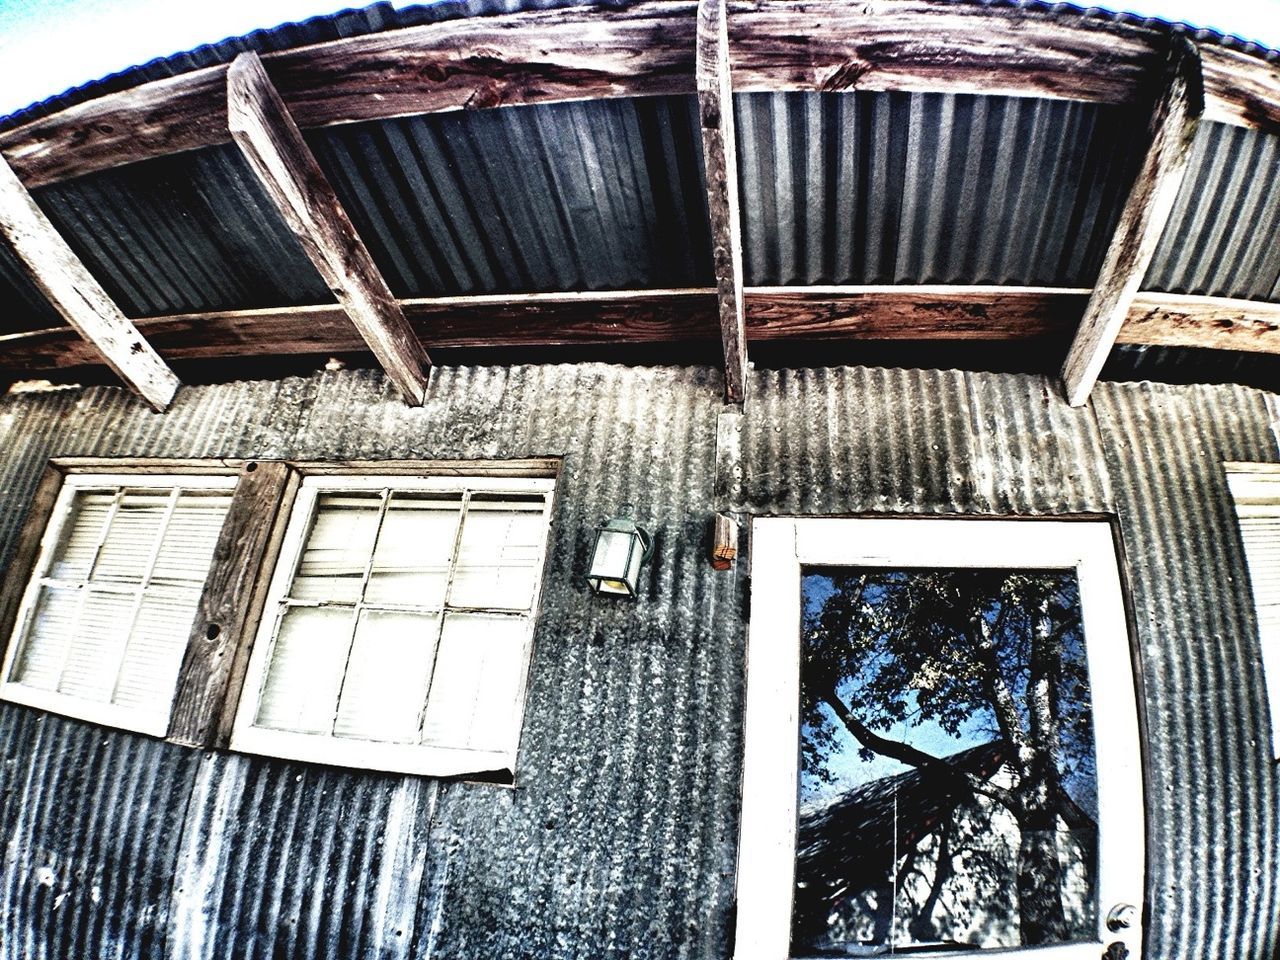 architecture, built structure, building exterior, low angle view, window, building, old, pattern, day, glass - material, metal, no people, outdoors, abandoned, sky, house, residential structure, damaged, full frame, architectural feature